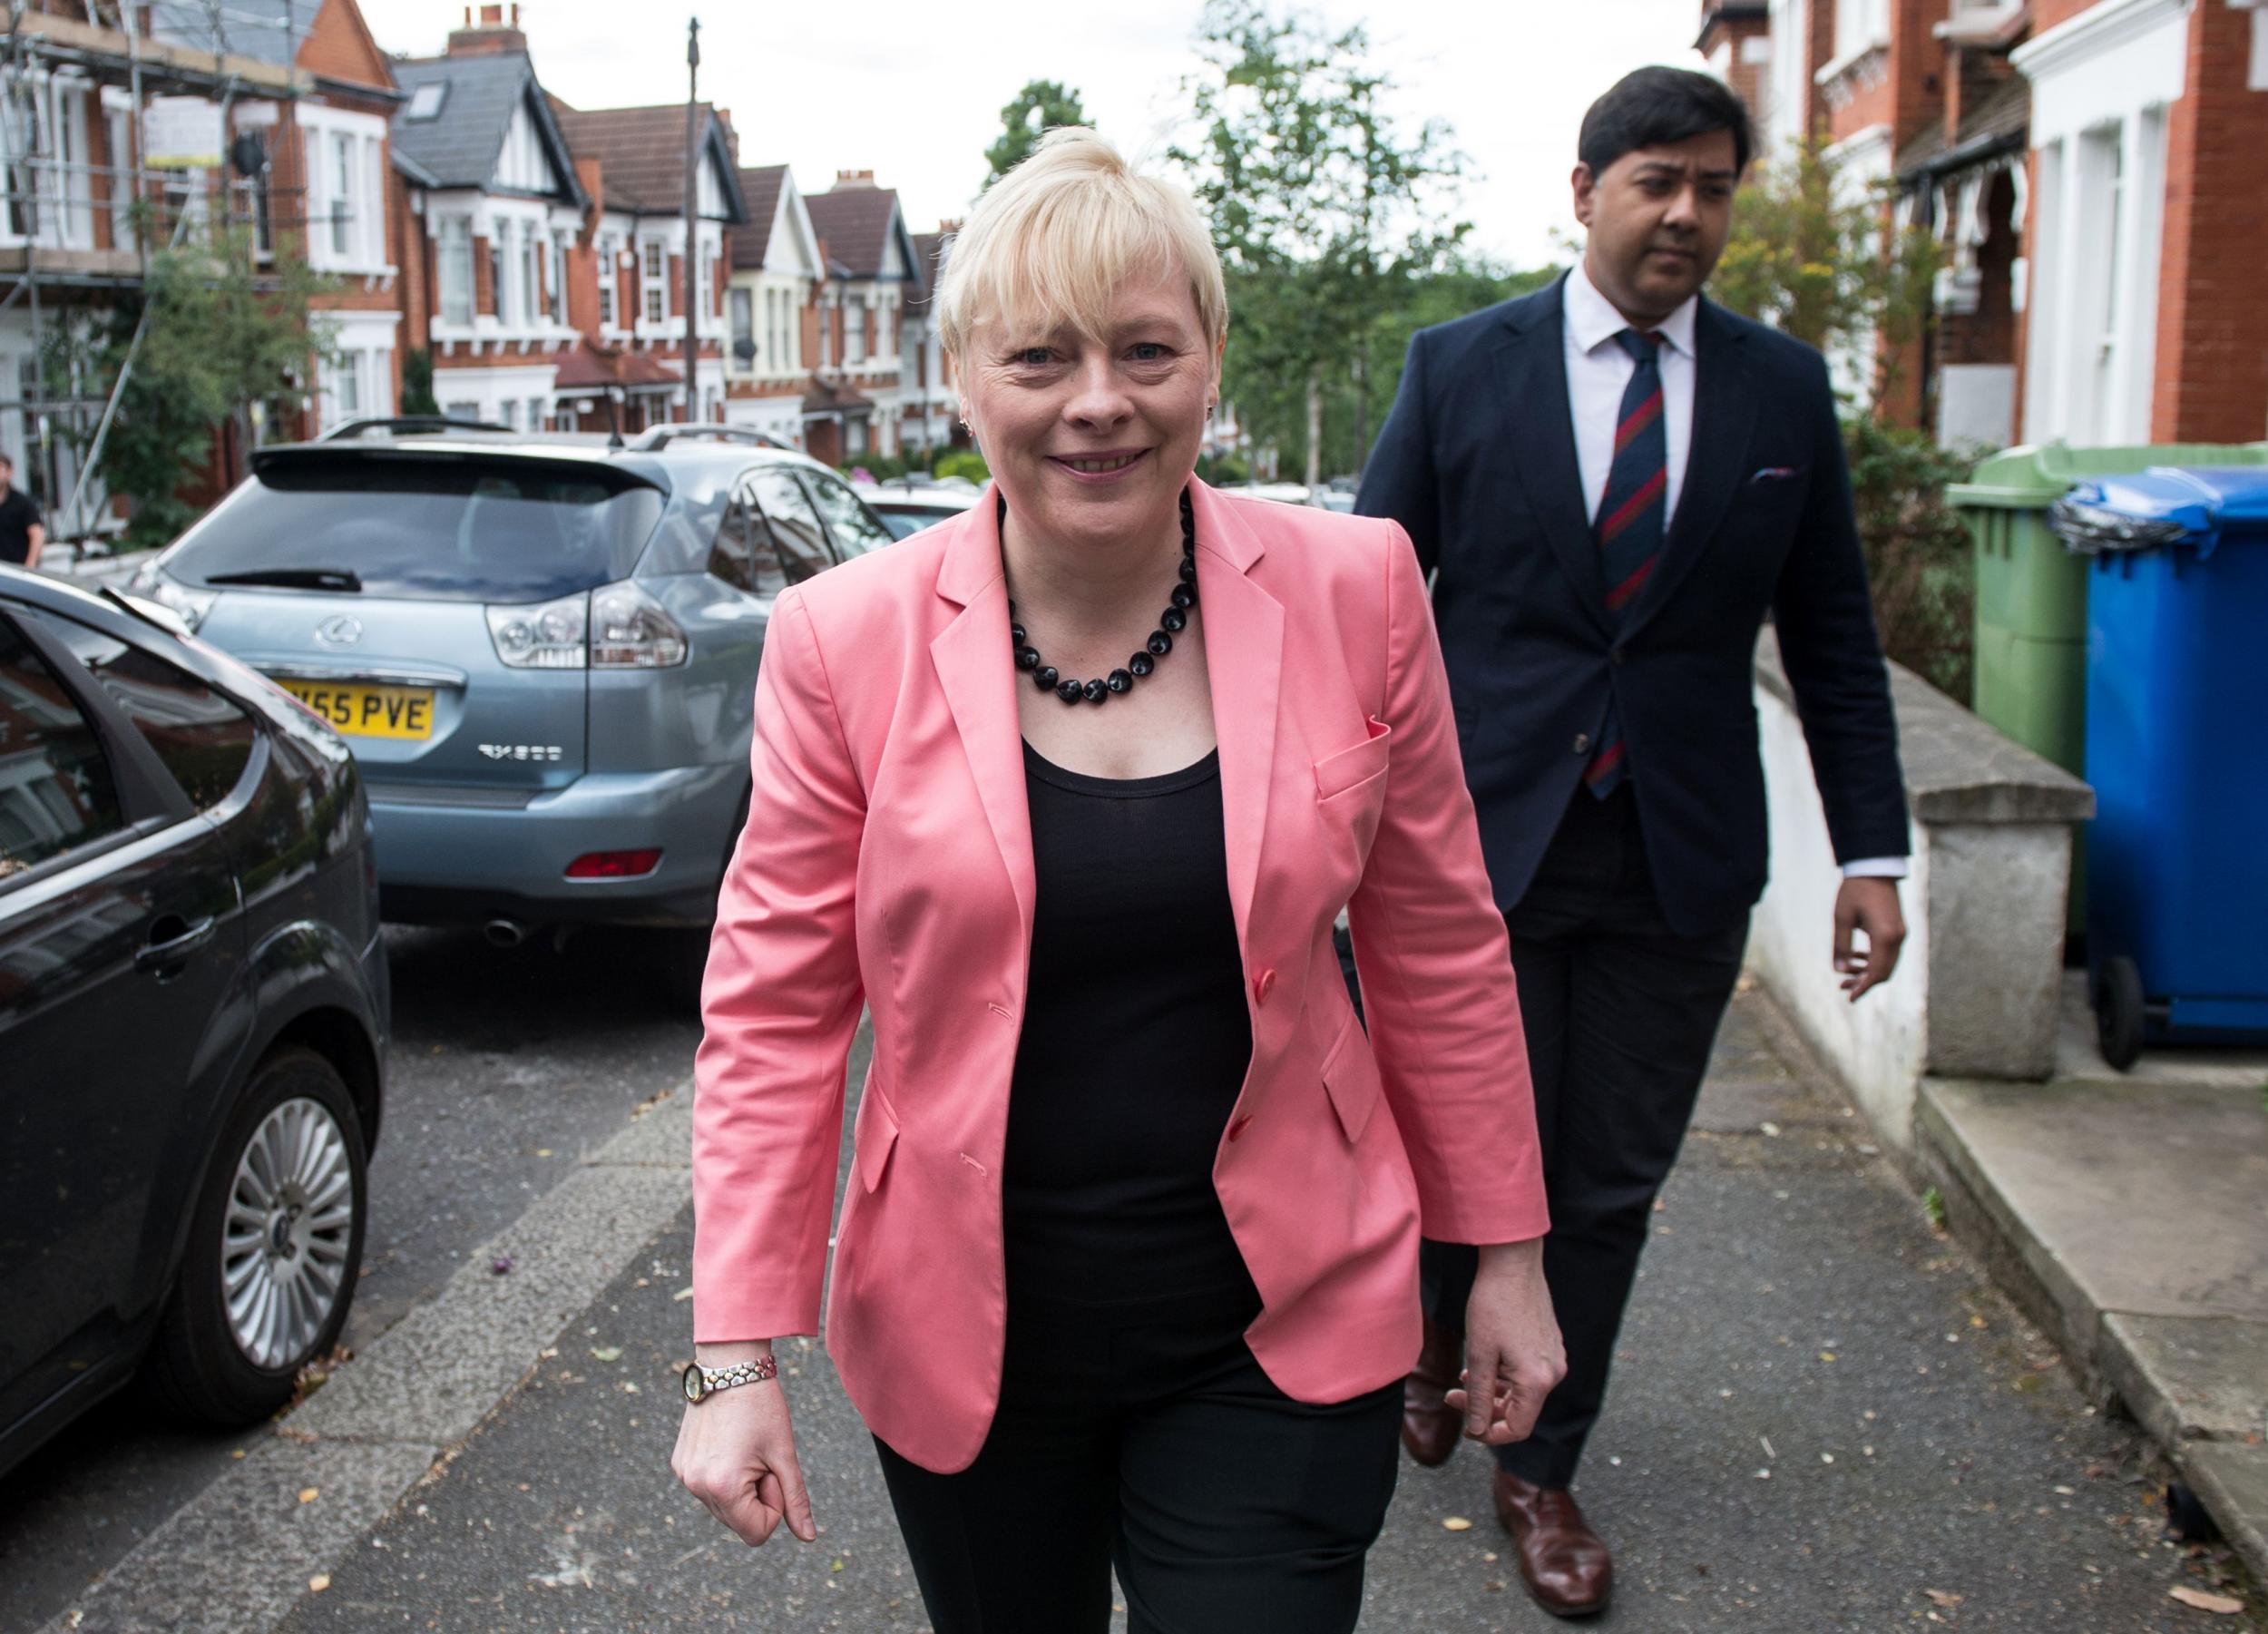 Angela Eagle is challenging Jeremy Corbyn for Labour leader